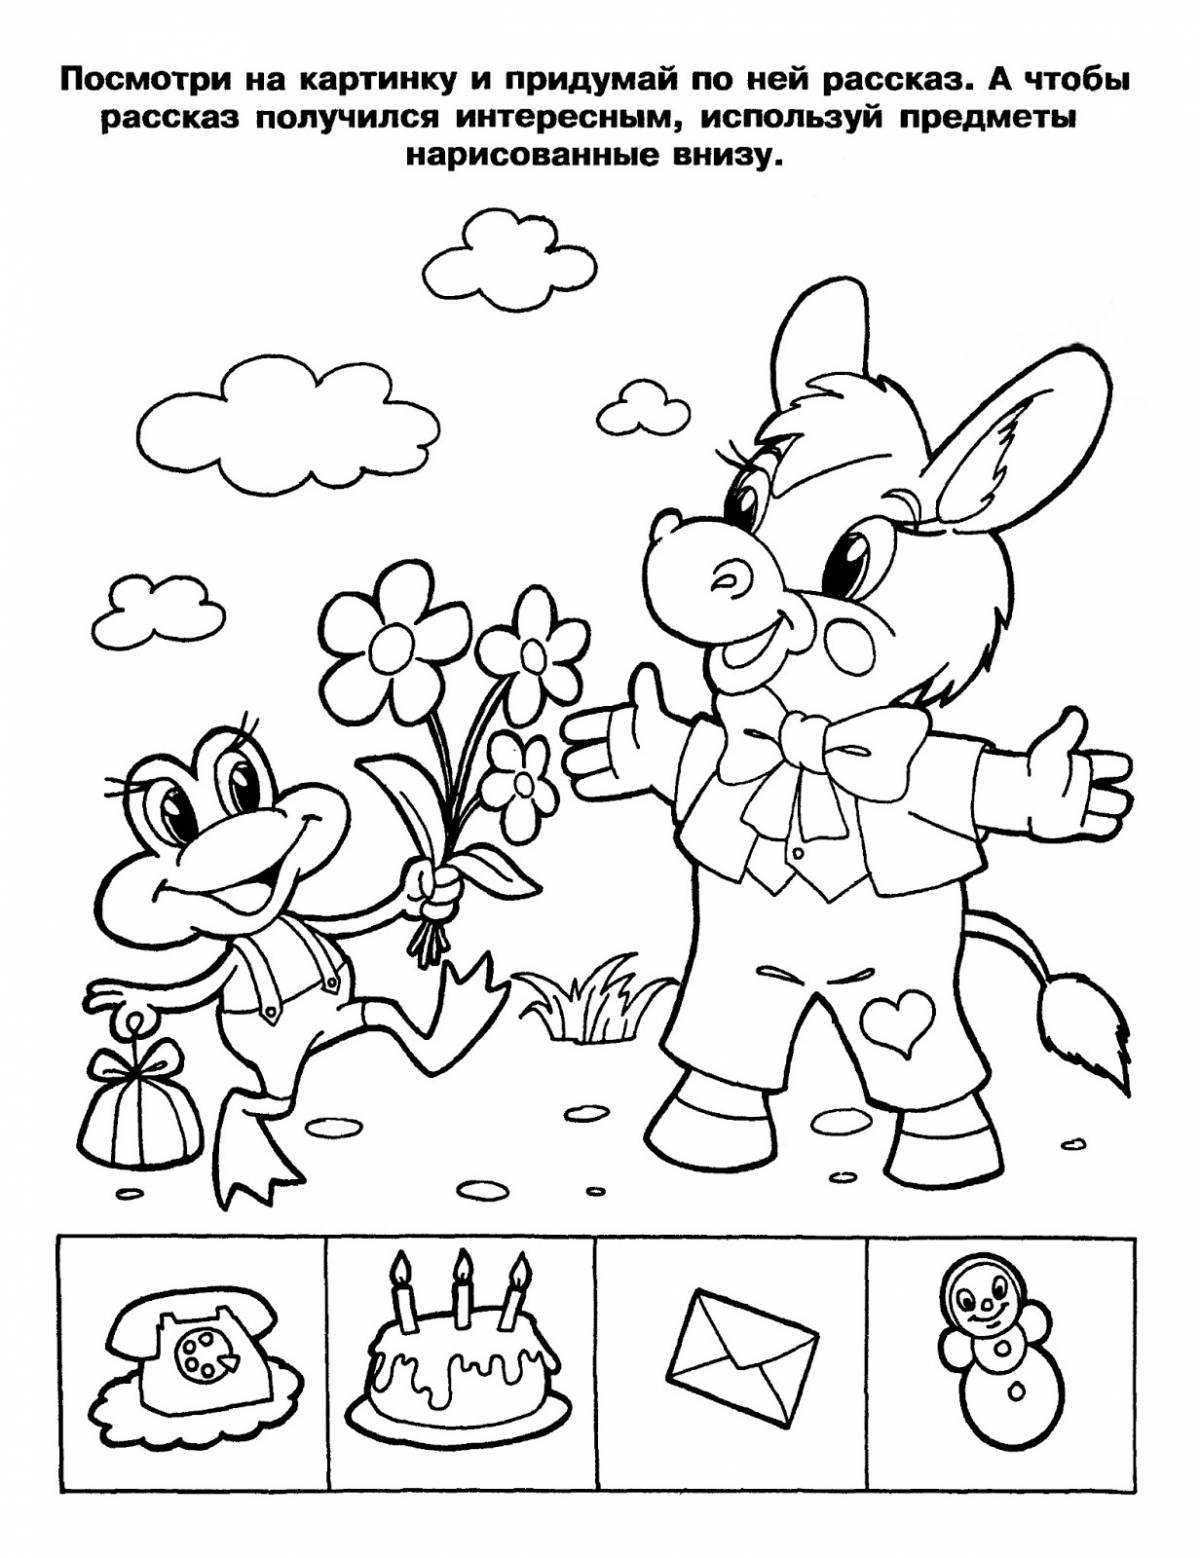 Colorful coloring book for beginners